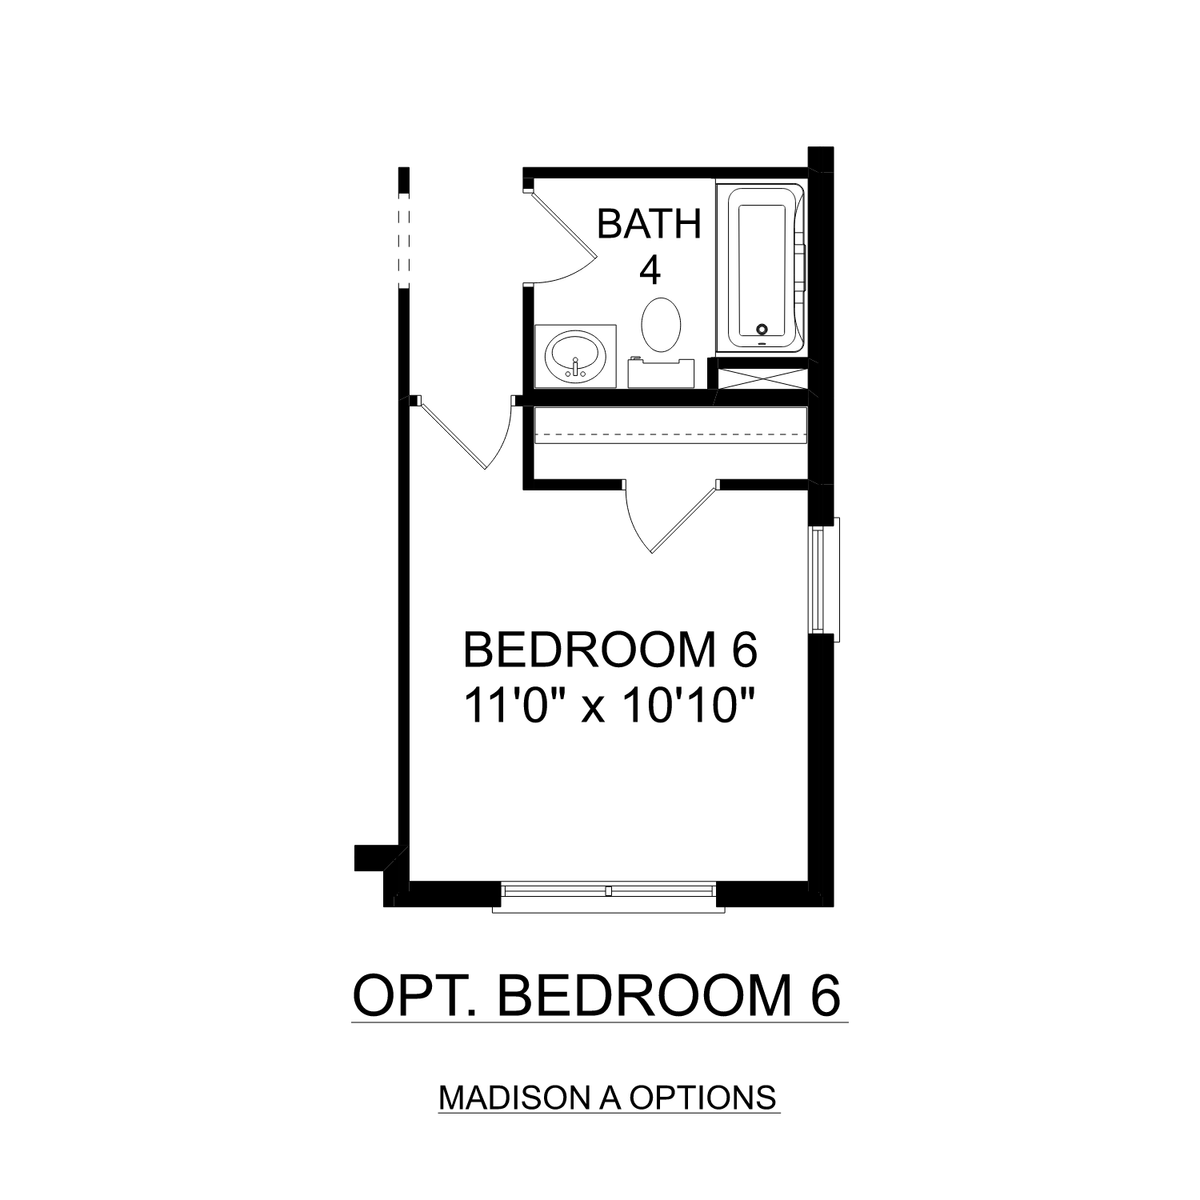 3 - The Madison A buildable floor plan layout in Davidson Homes' Cain Park community.